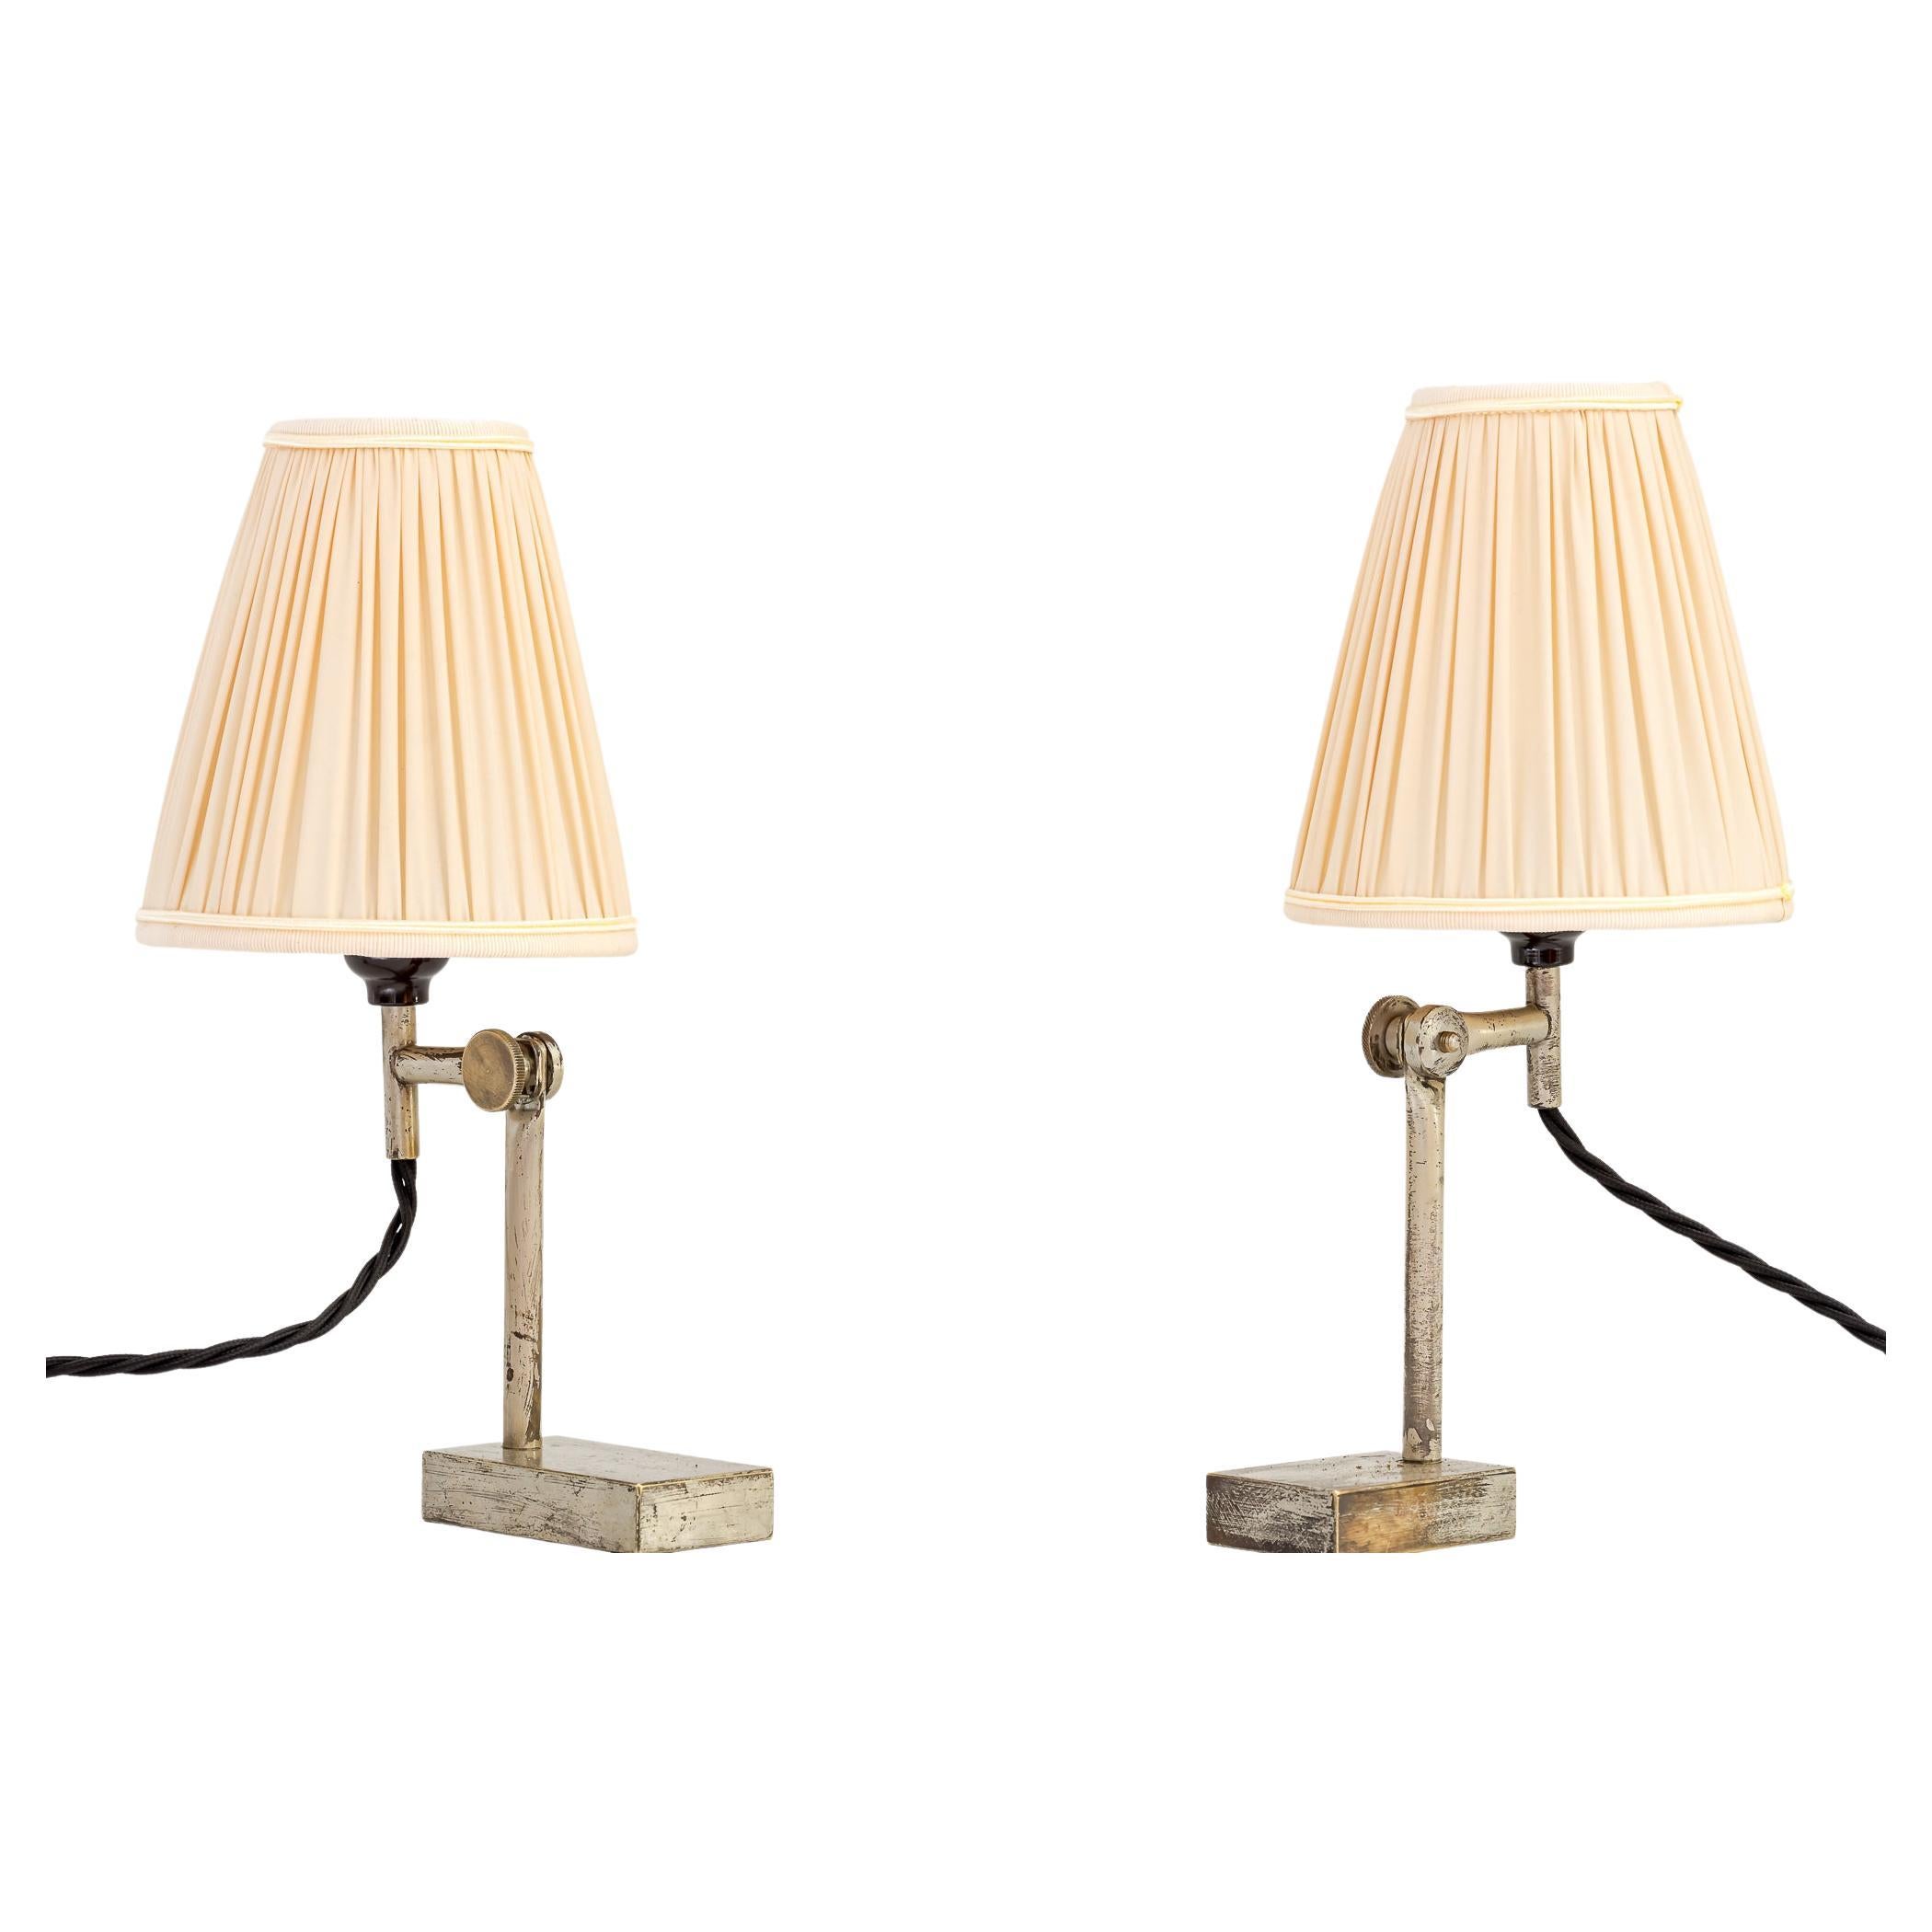 2 Adjustable Vintage Table Lamps, Vienna, Around 1950s For Sale